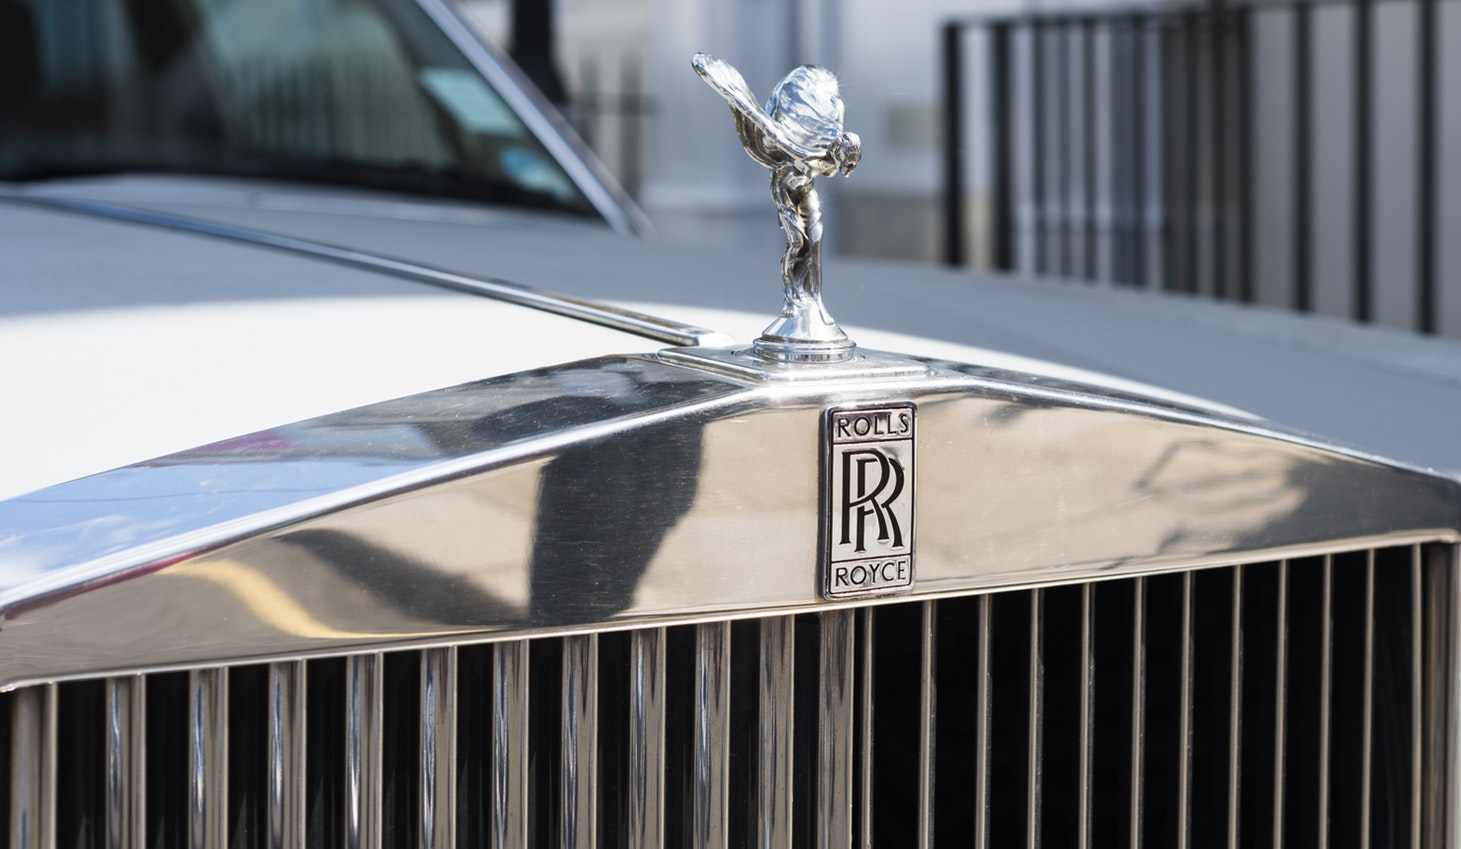 A Look at How Rolls-Royce Defended Thousands of Job Cuts 2